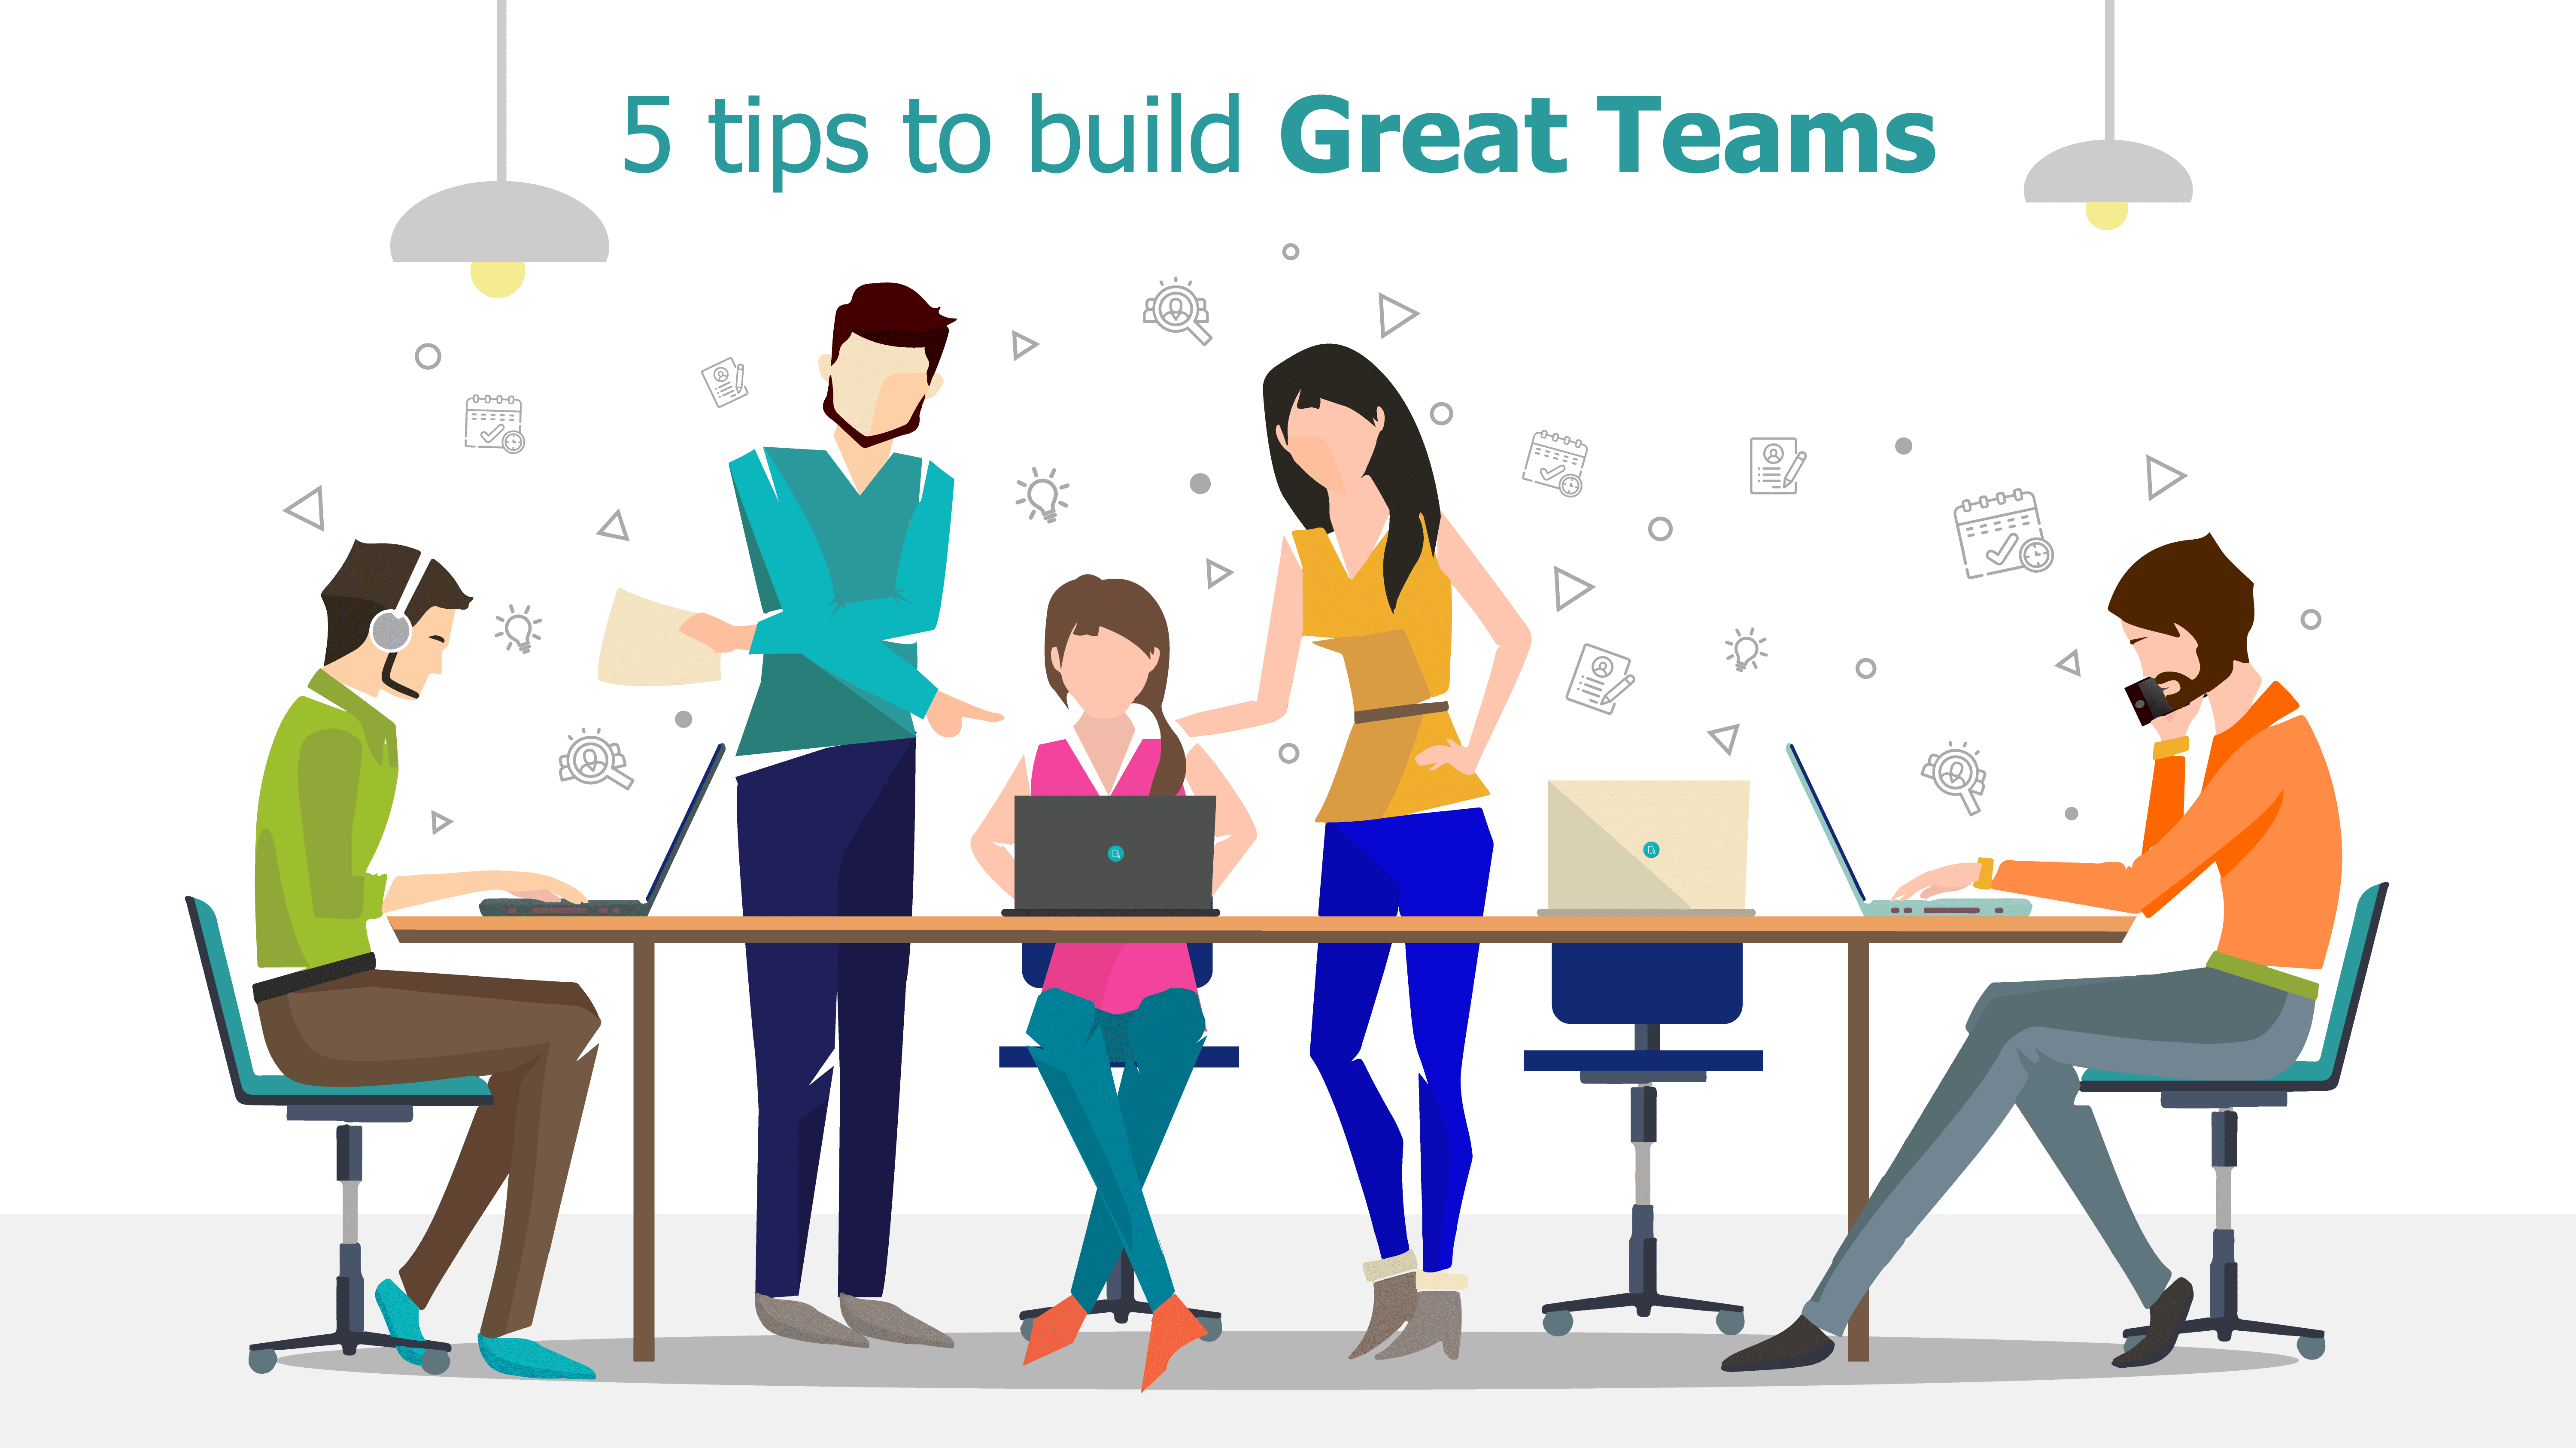 How to build team, tips to build great teams